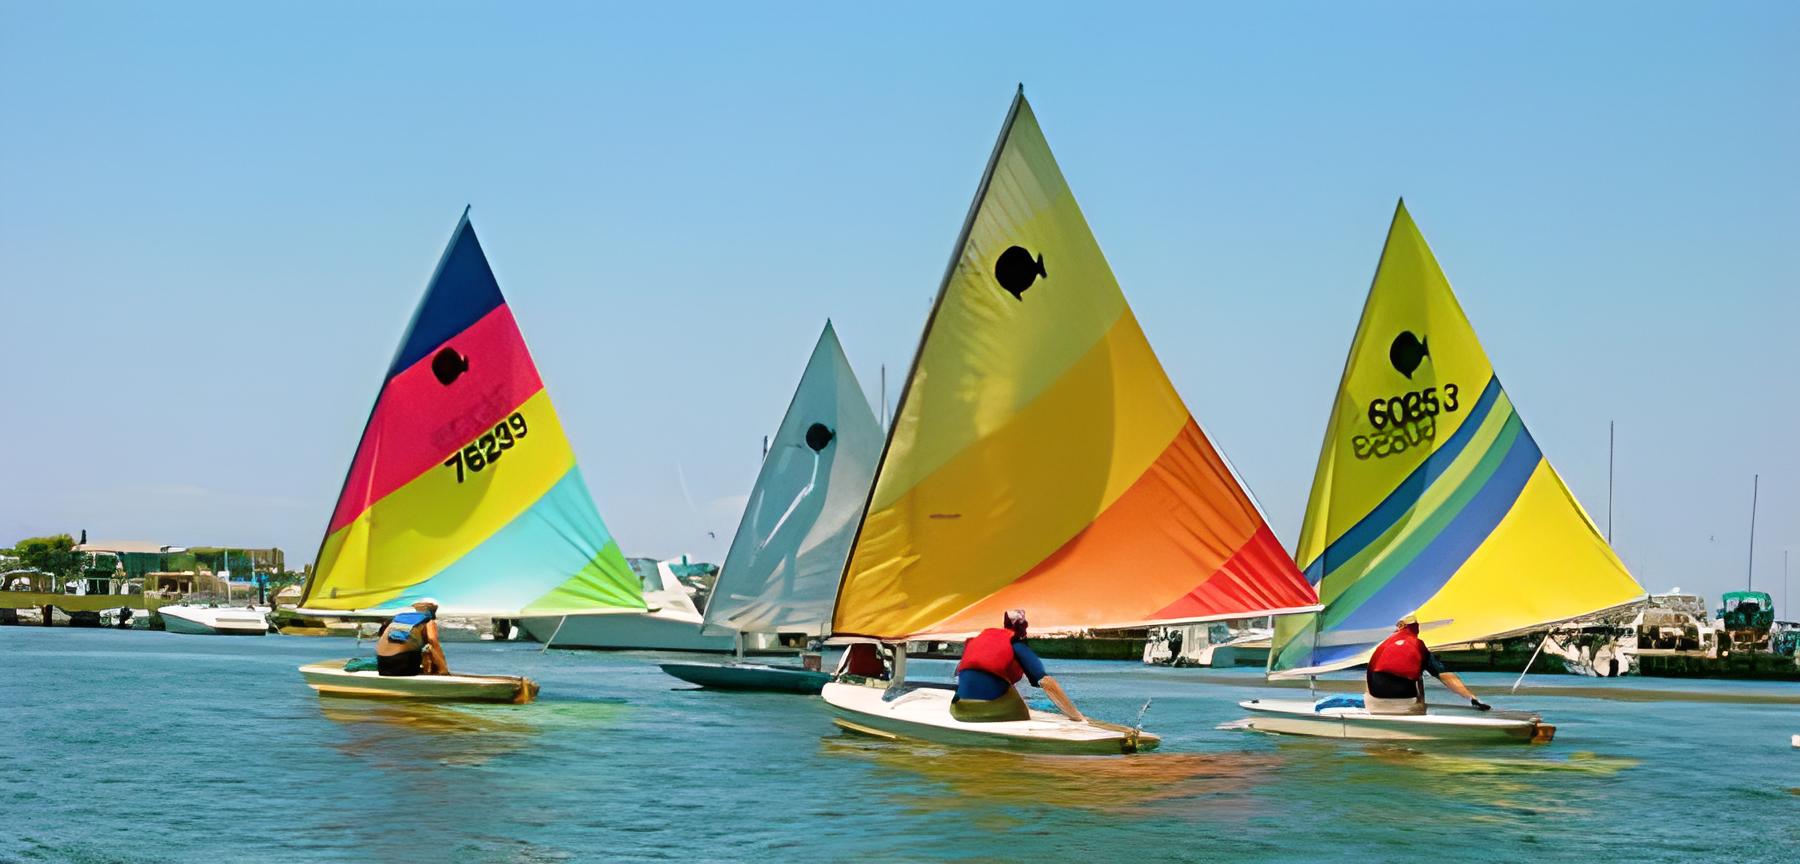 Is a Sunfish a Wise Choice for Sailing?